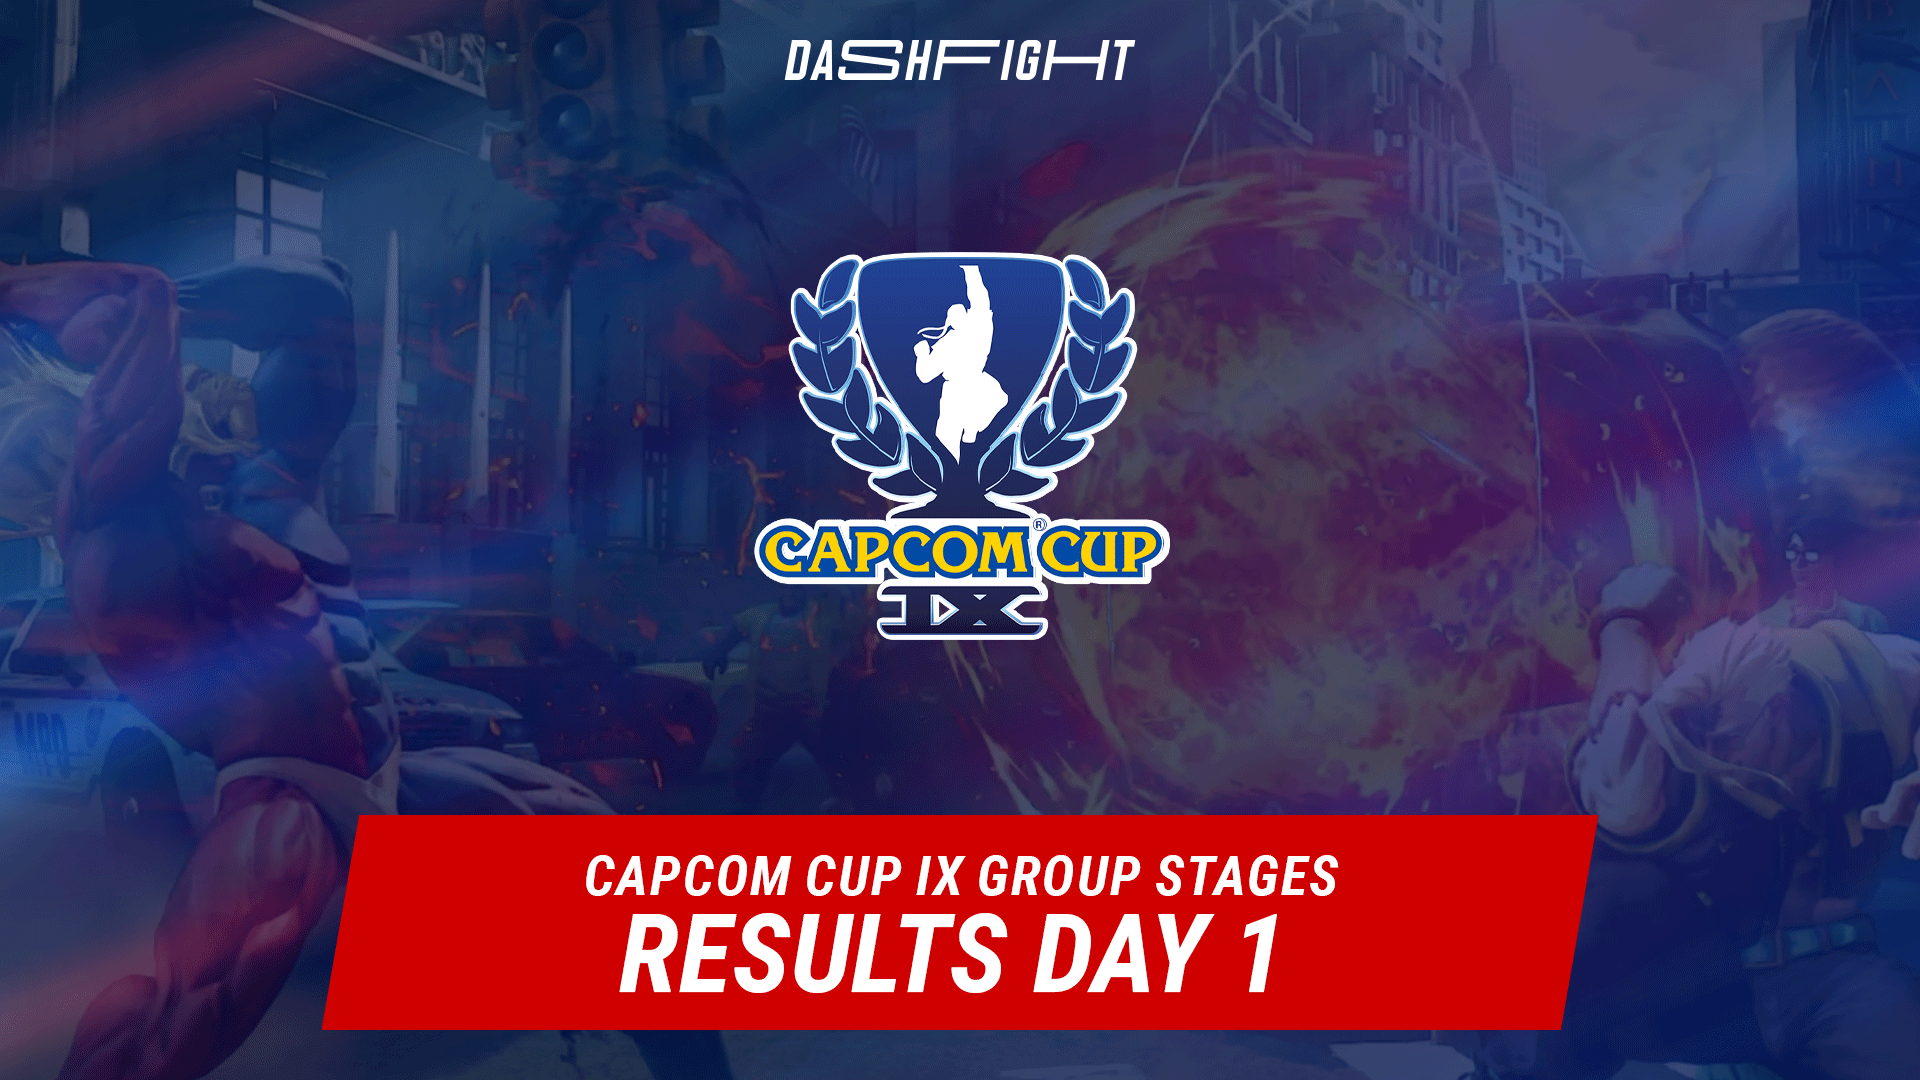 Capcom Cup IX Recap: All Day One Results and Standings